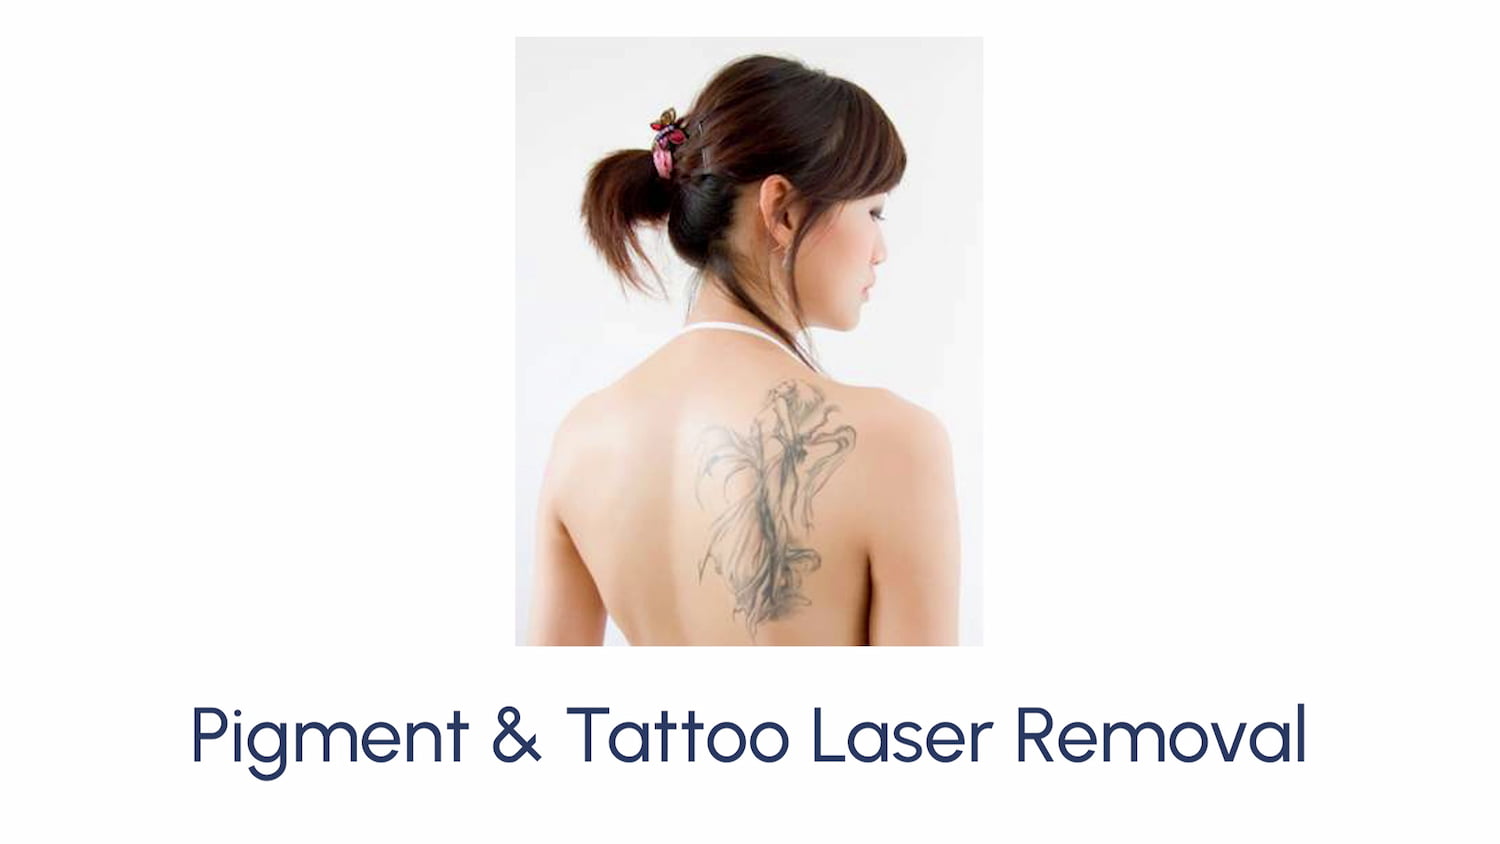 PTNR01A998WXY Laser Tattoo Removal  Level 5 Certificate Learning Program  Video Course  PTNR01A998WXY  Flipkartcom